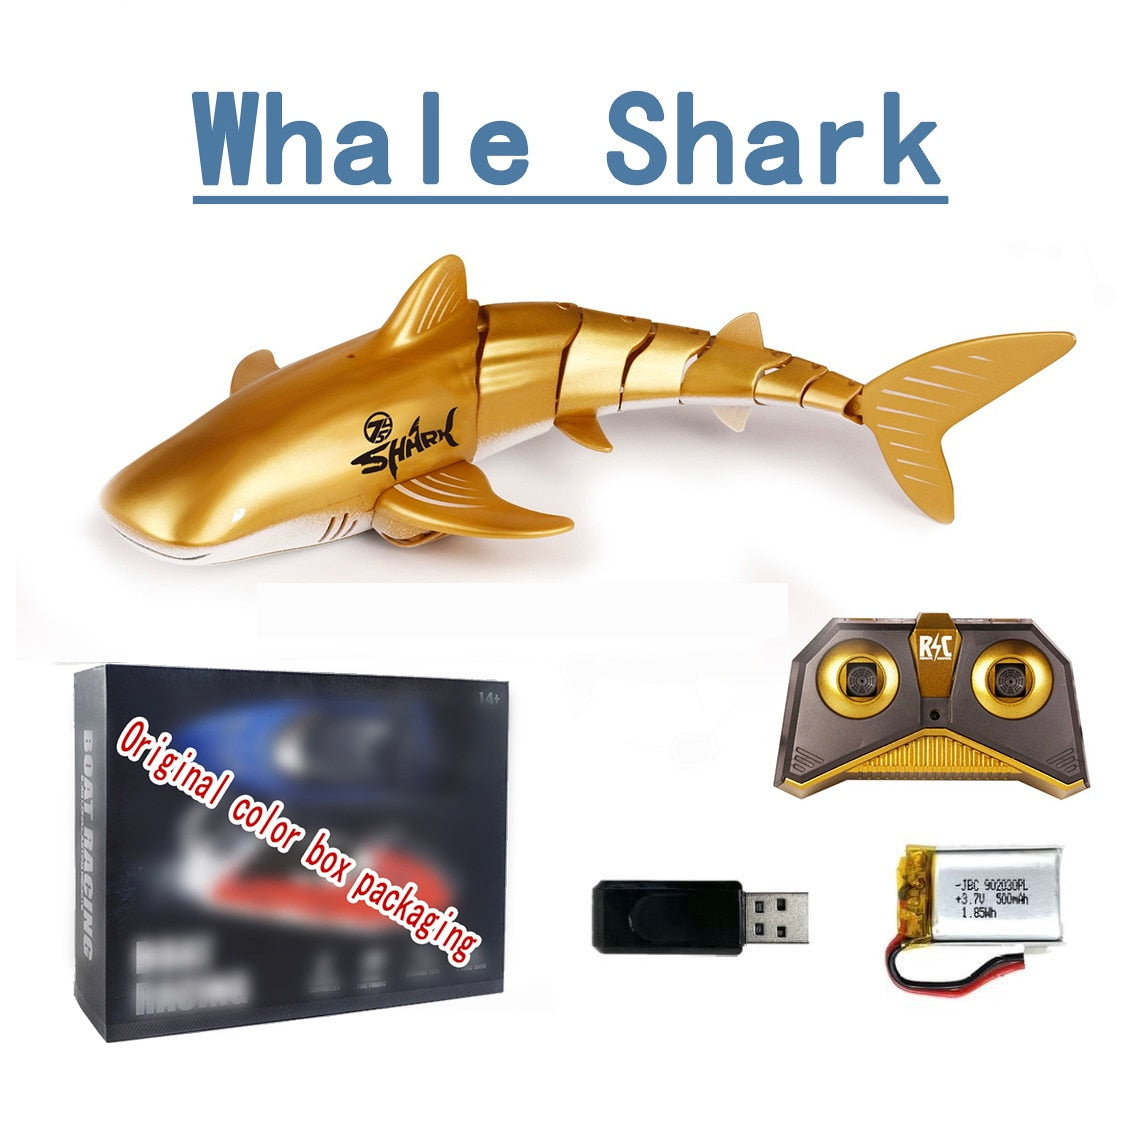 Remote Control Shark Toy Robots RC Electric Sharks toy